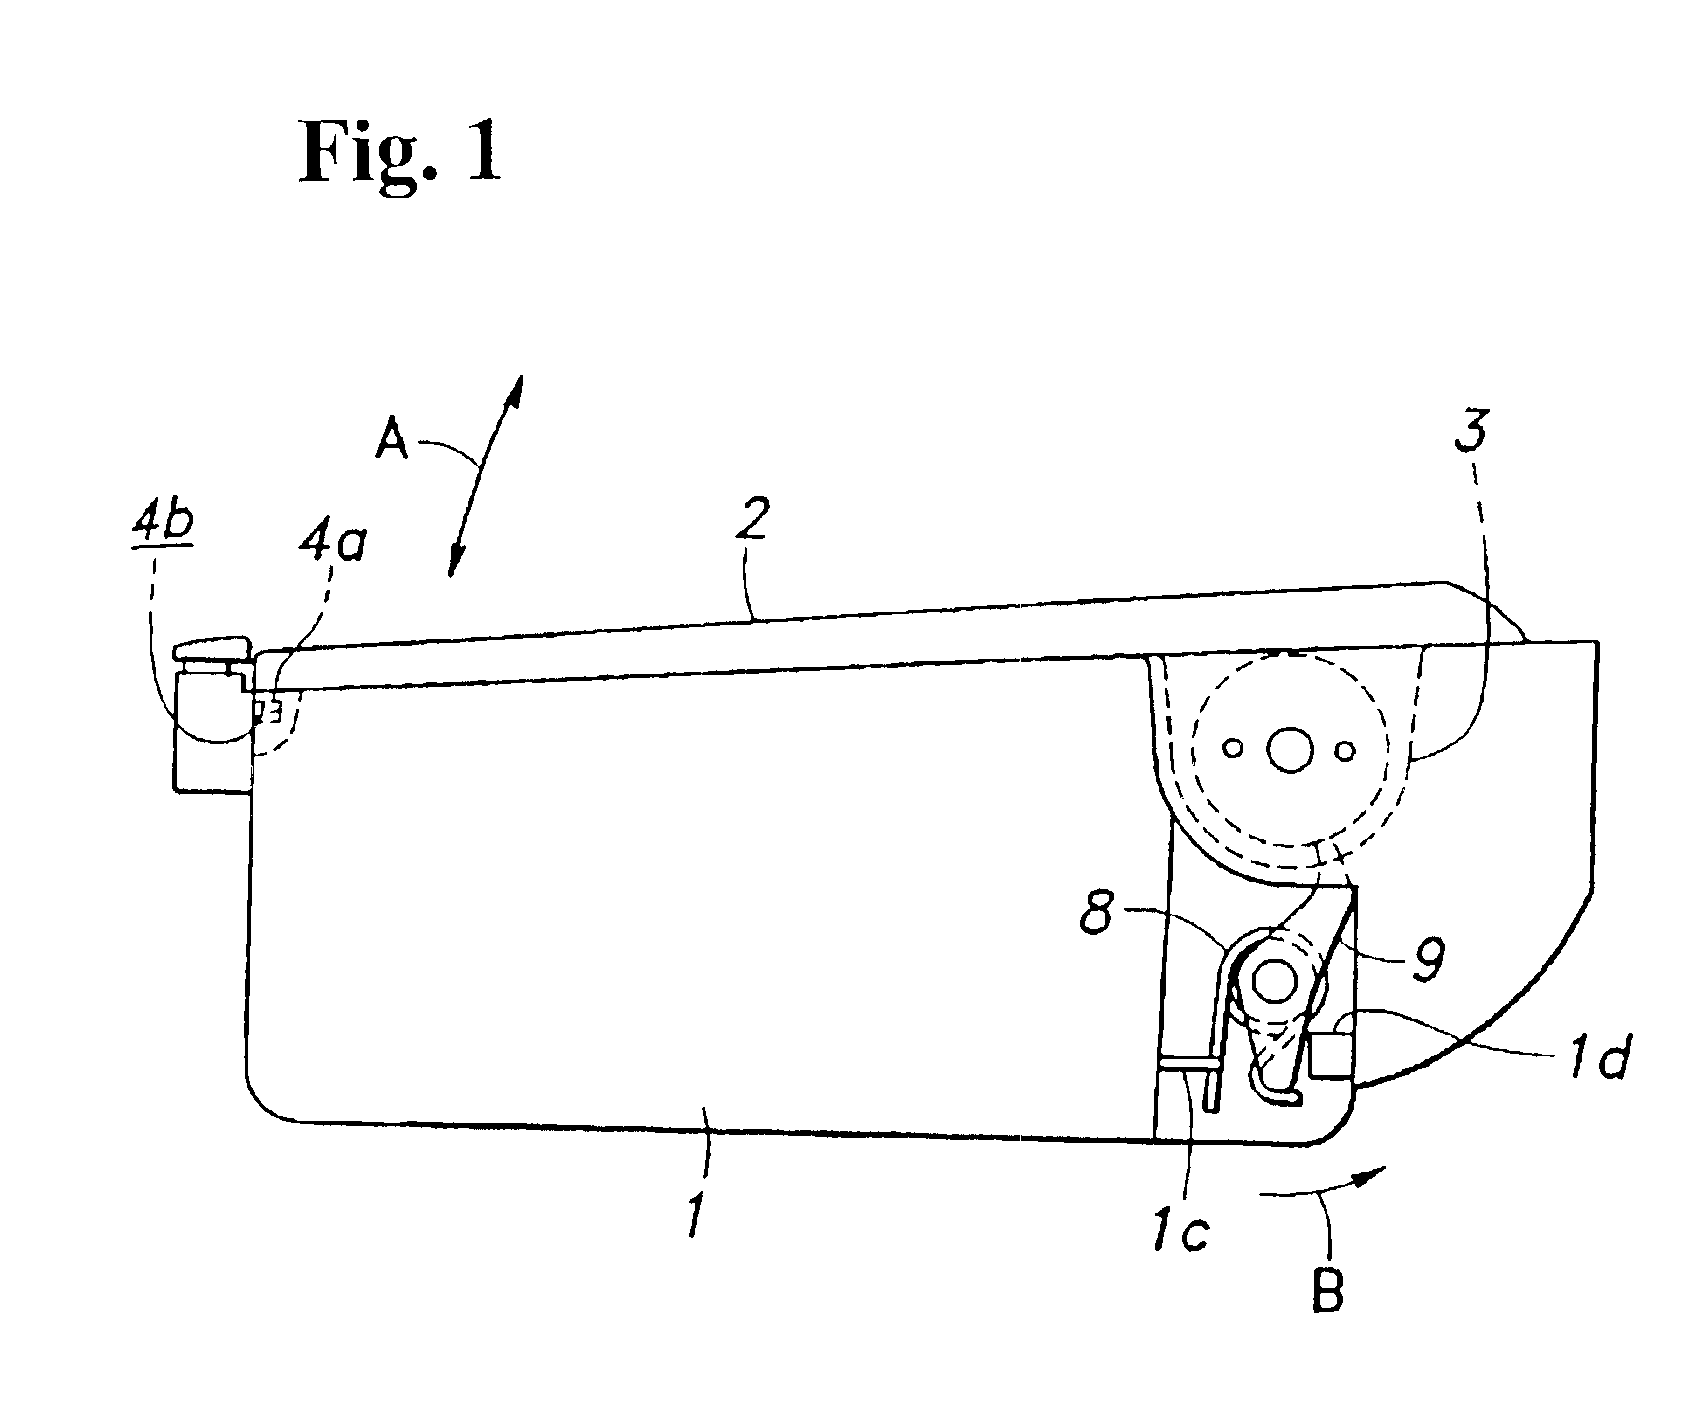 Lid opening device